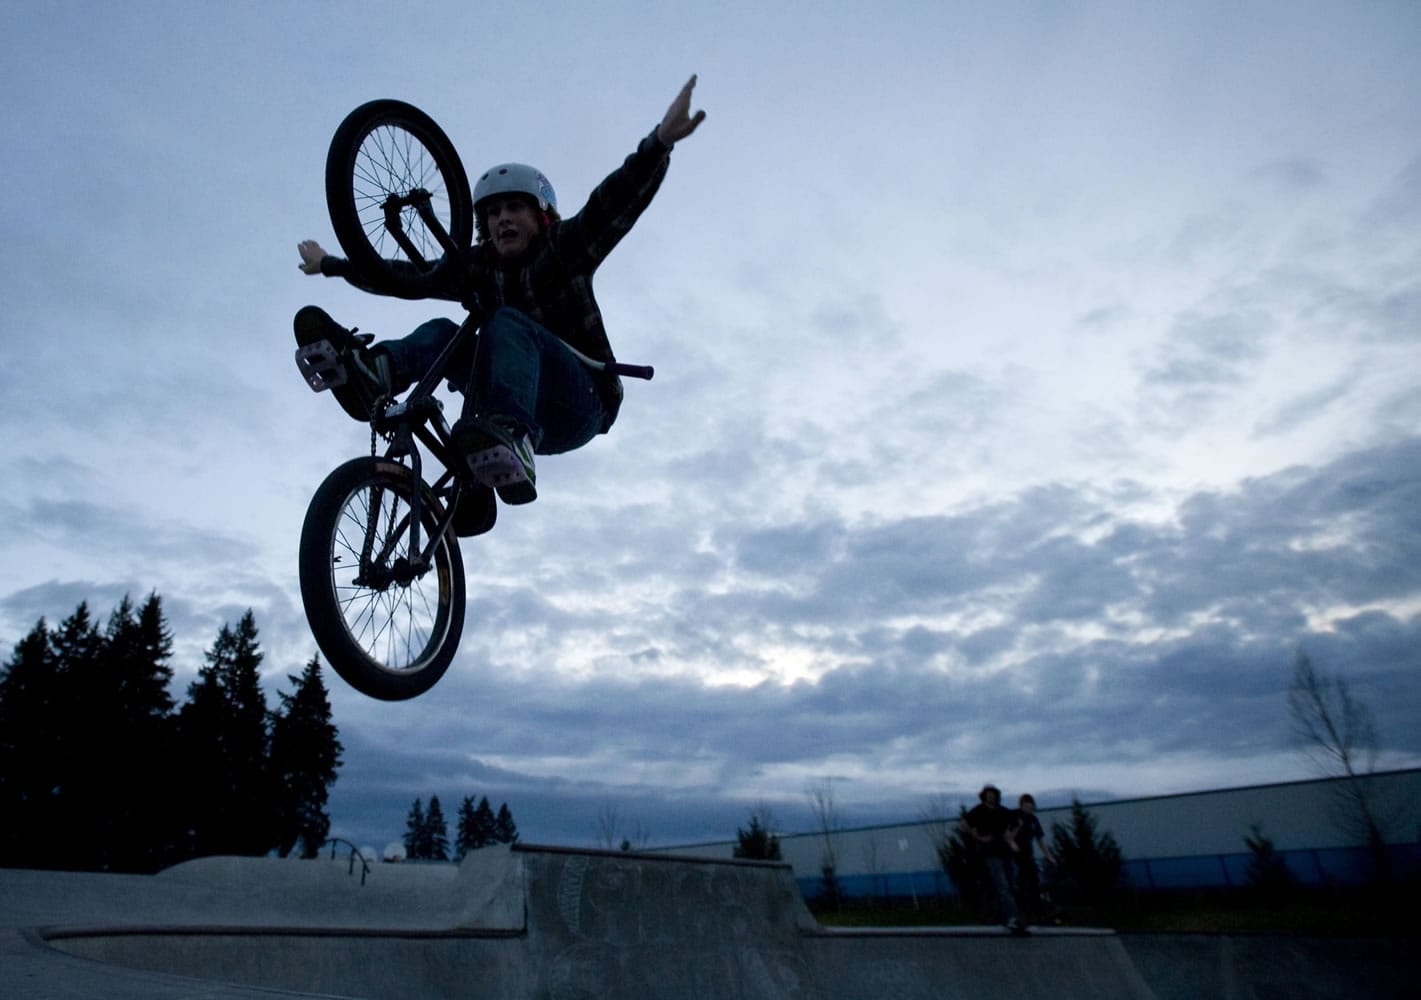 Justin Zuvich uses the last moments of daylight to practice his bike tricks at Pacific Community Park.